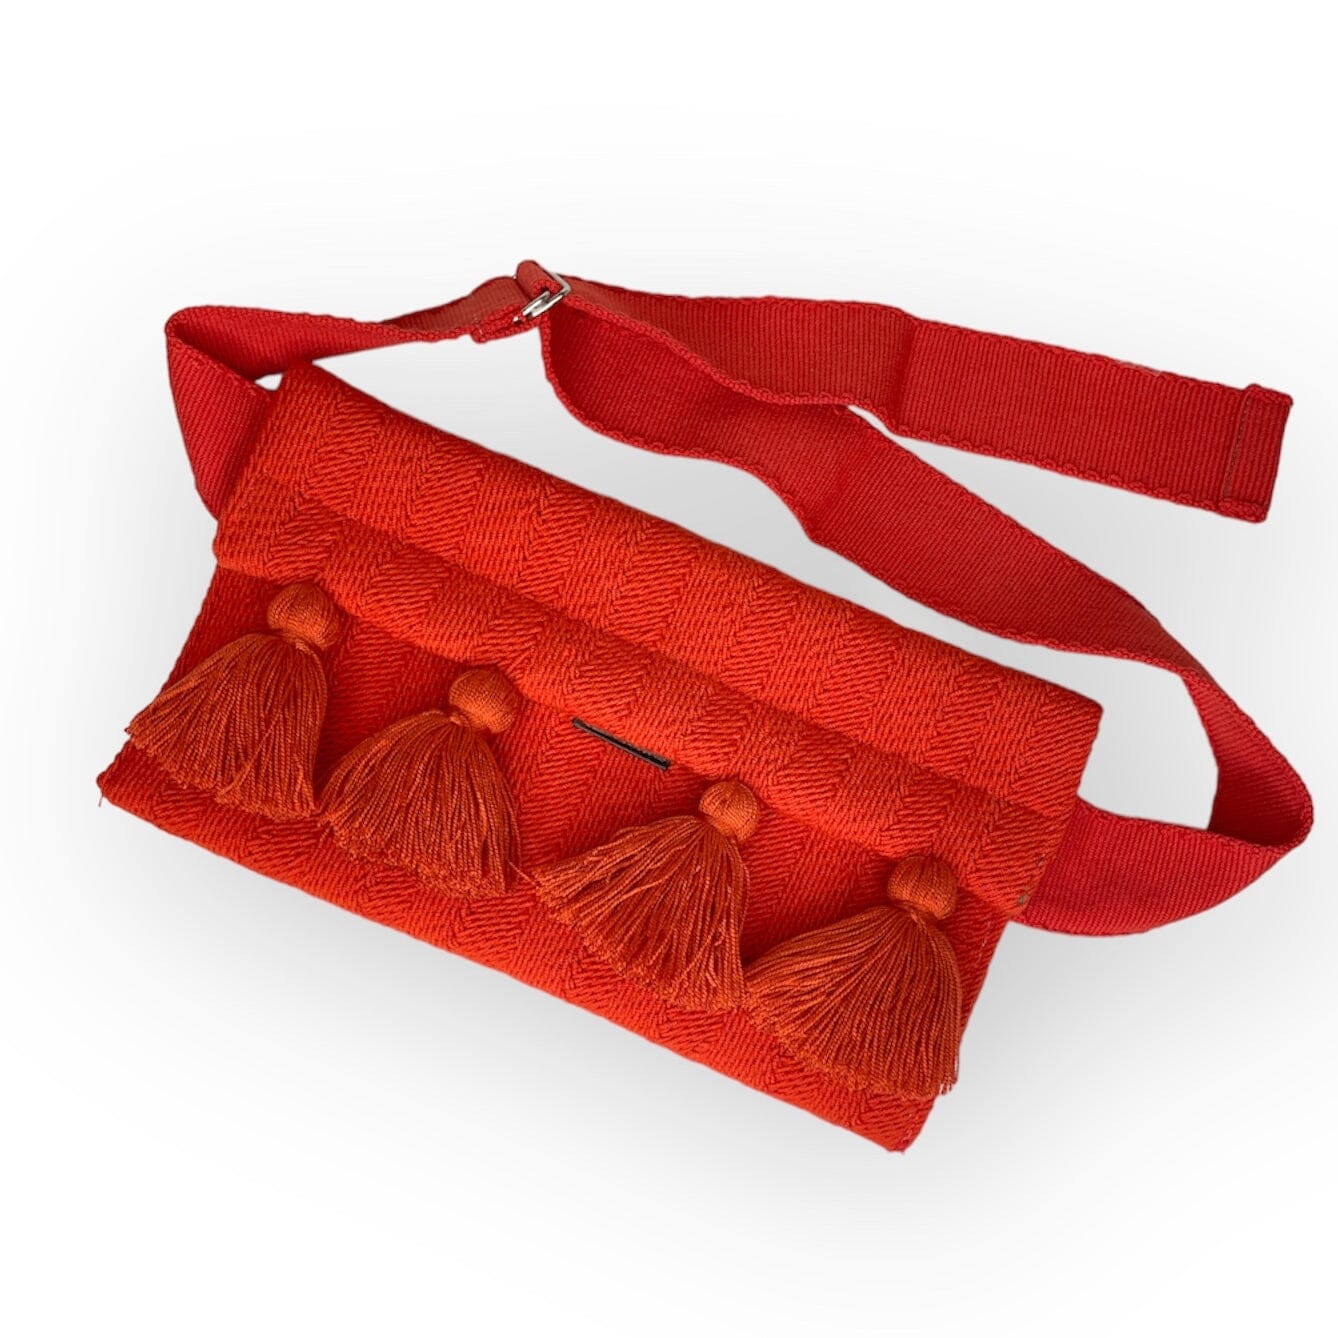 Rust Red Sage Green Hand-Woven Fanny Packs | Handmade Bumbags | Travel Waist Bags for women | Colorful 4U